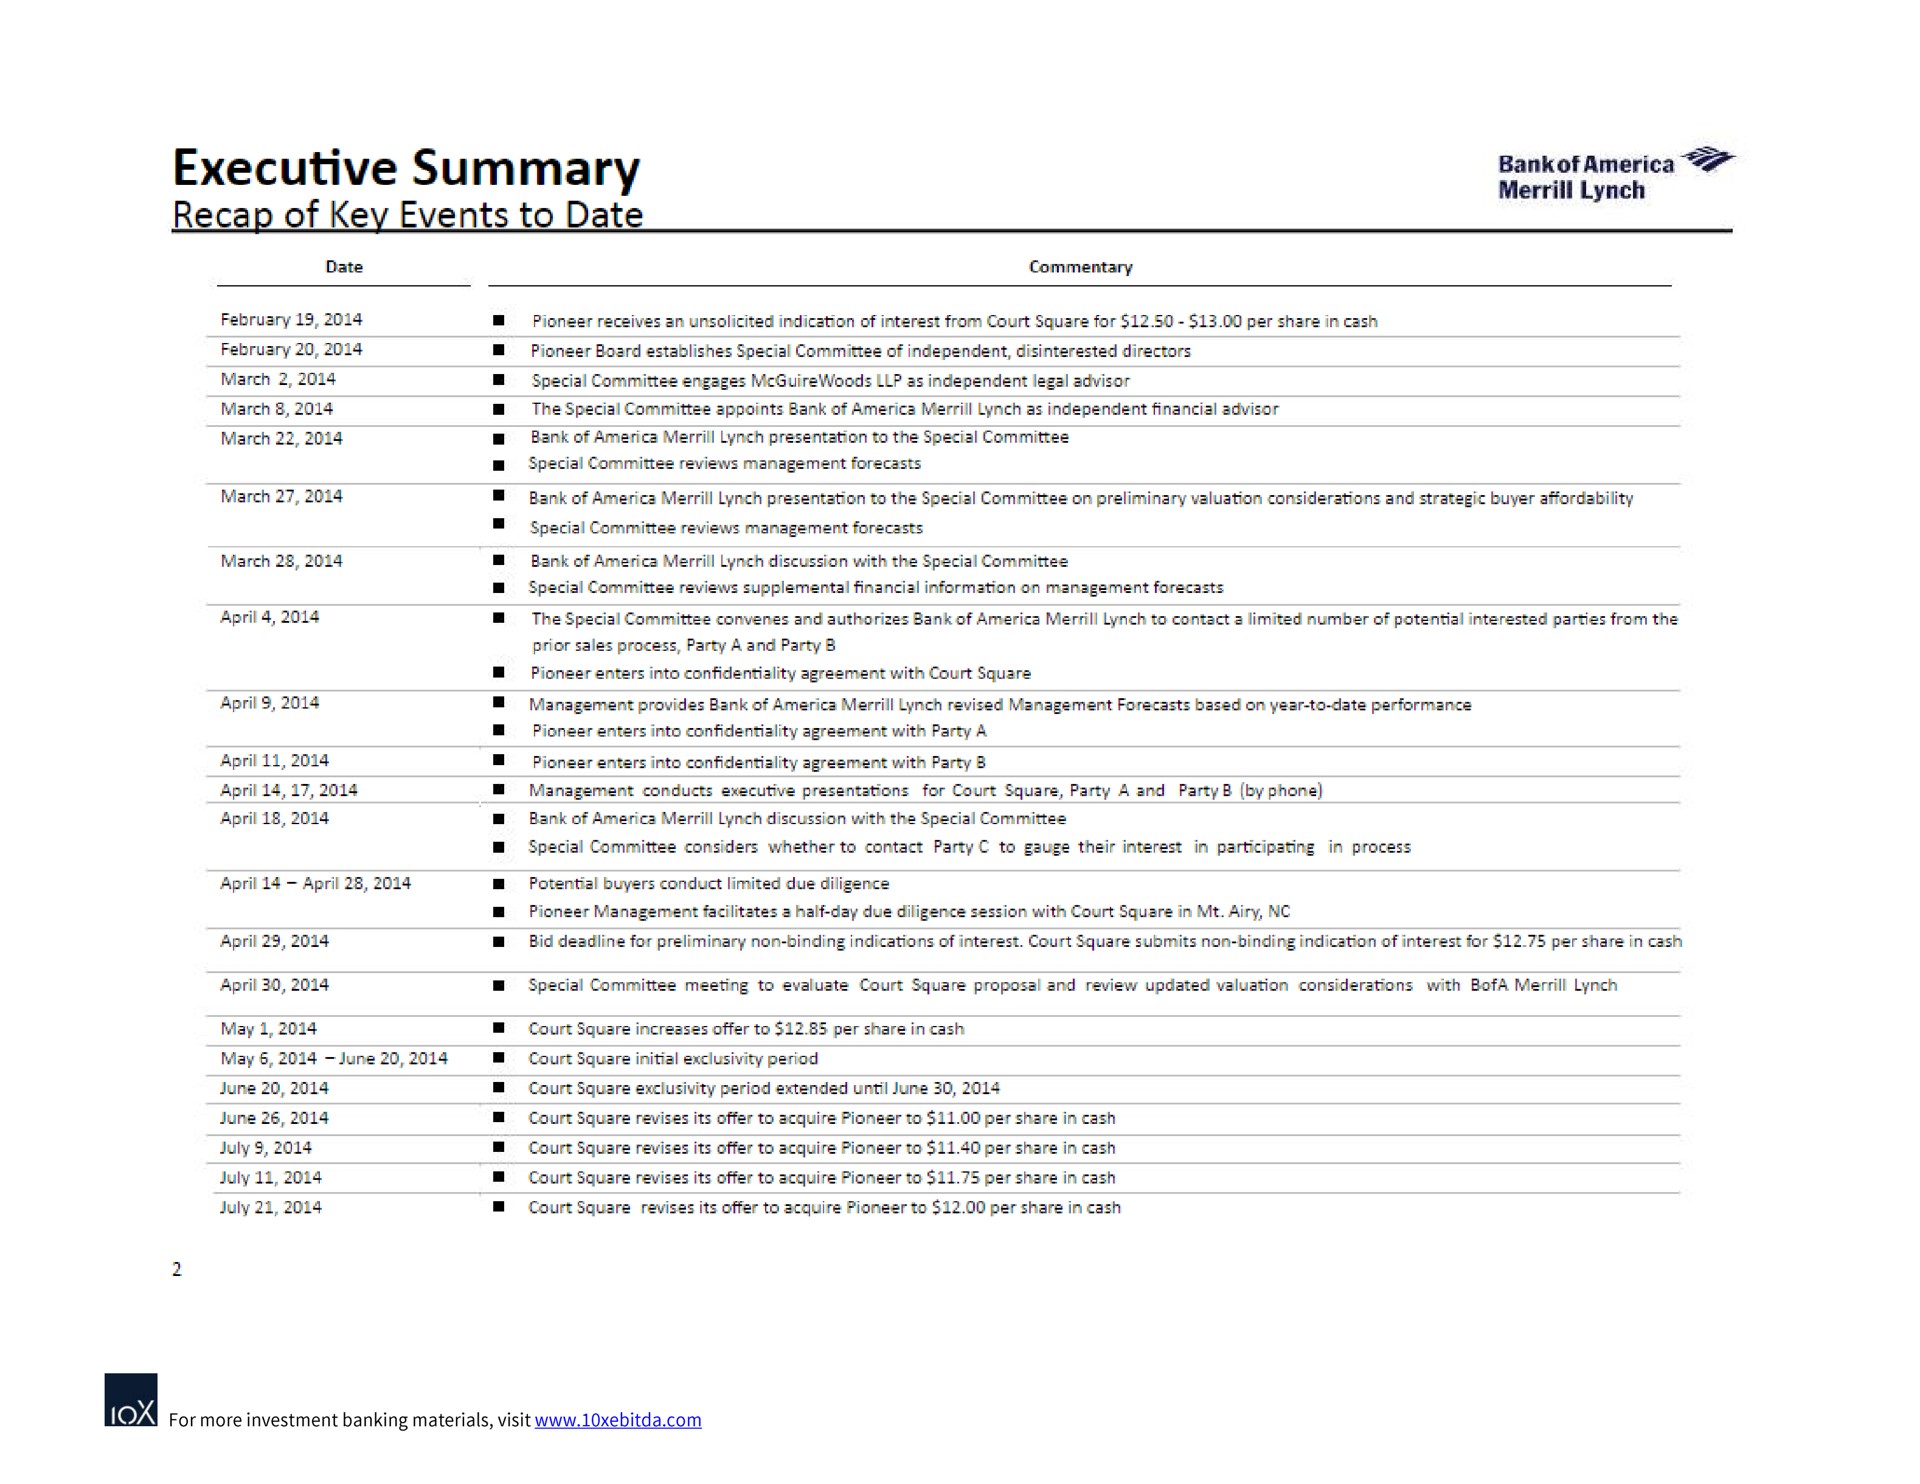 executive summary recap of key events to date | Bank of America